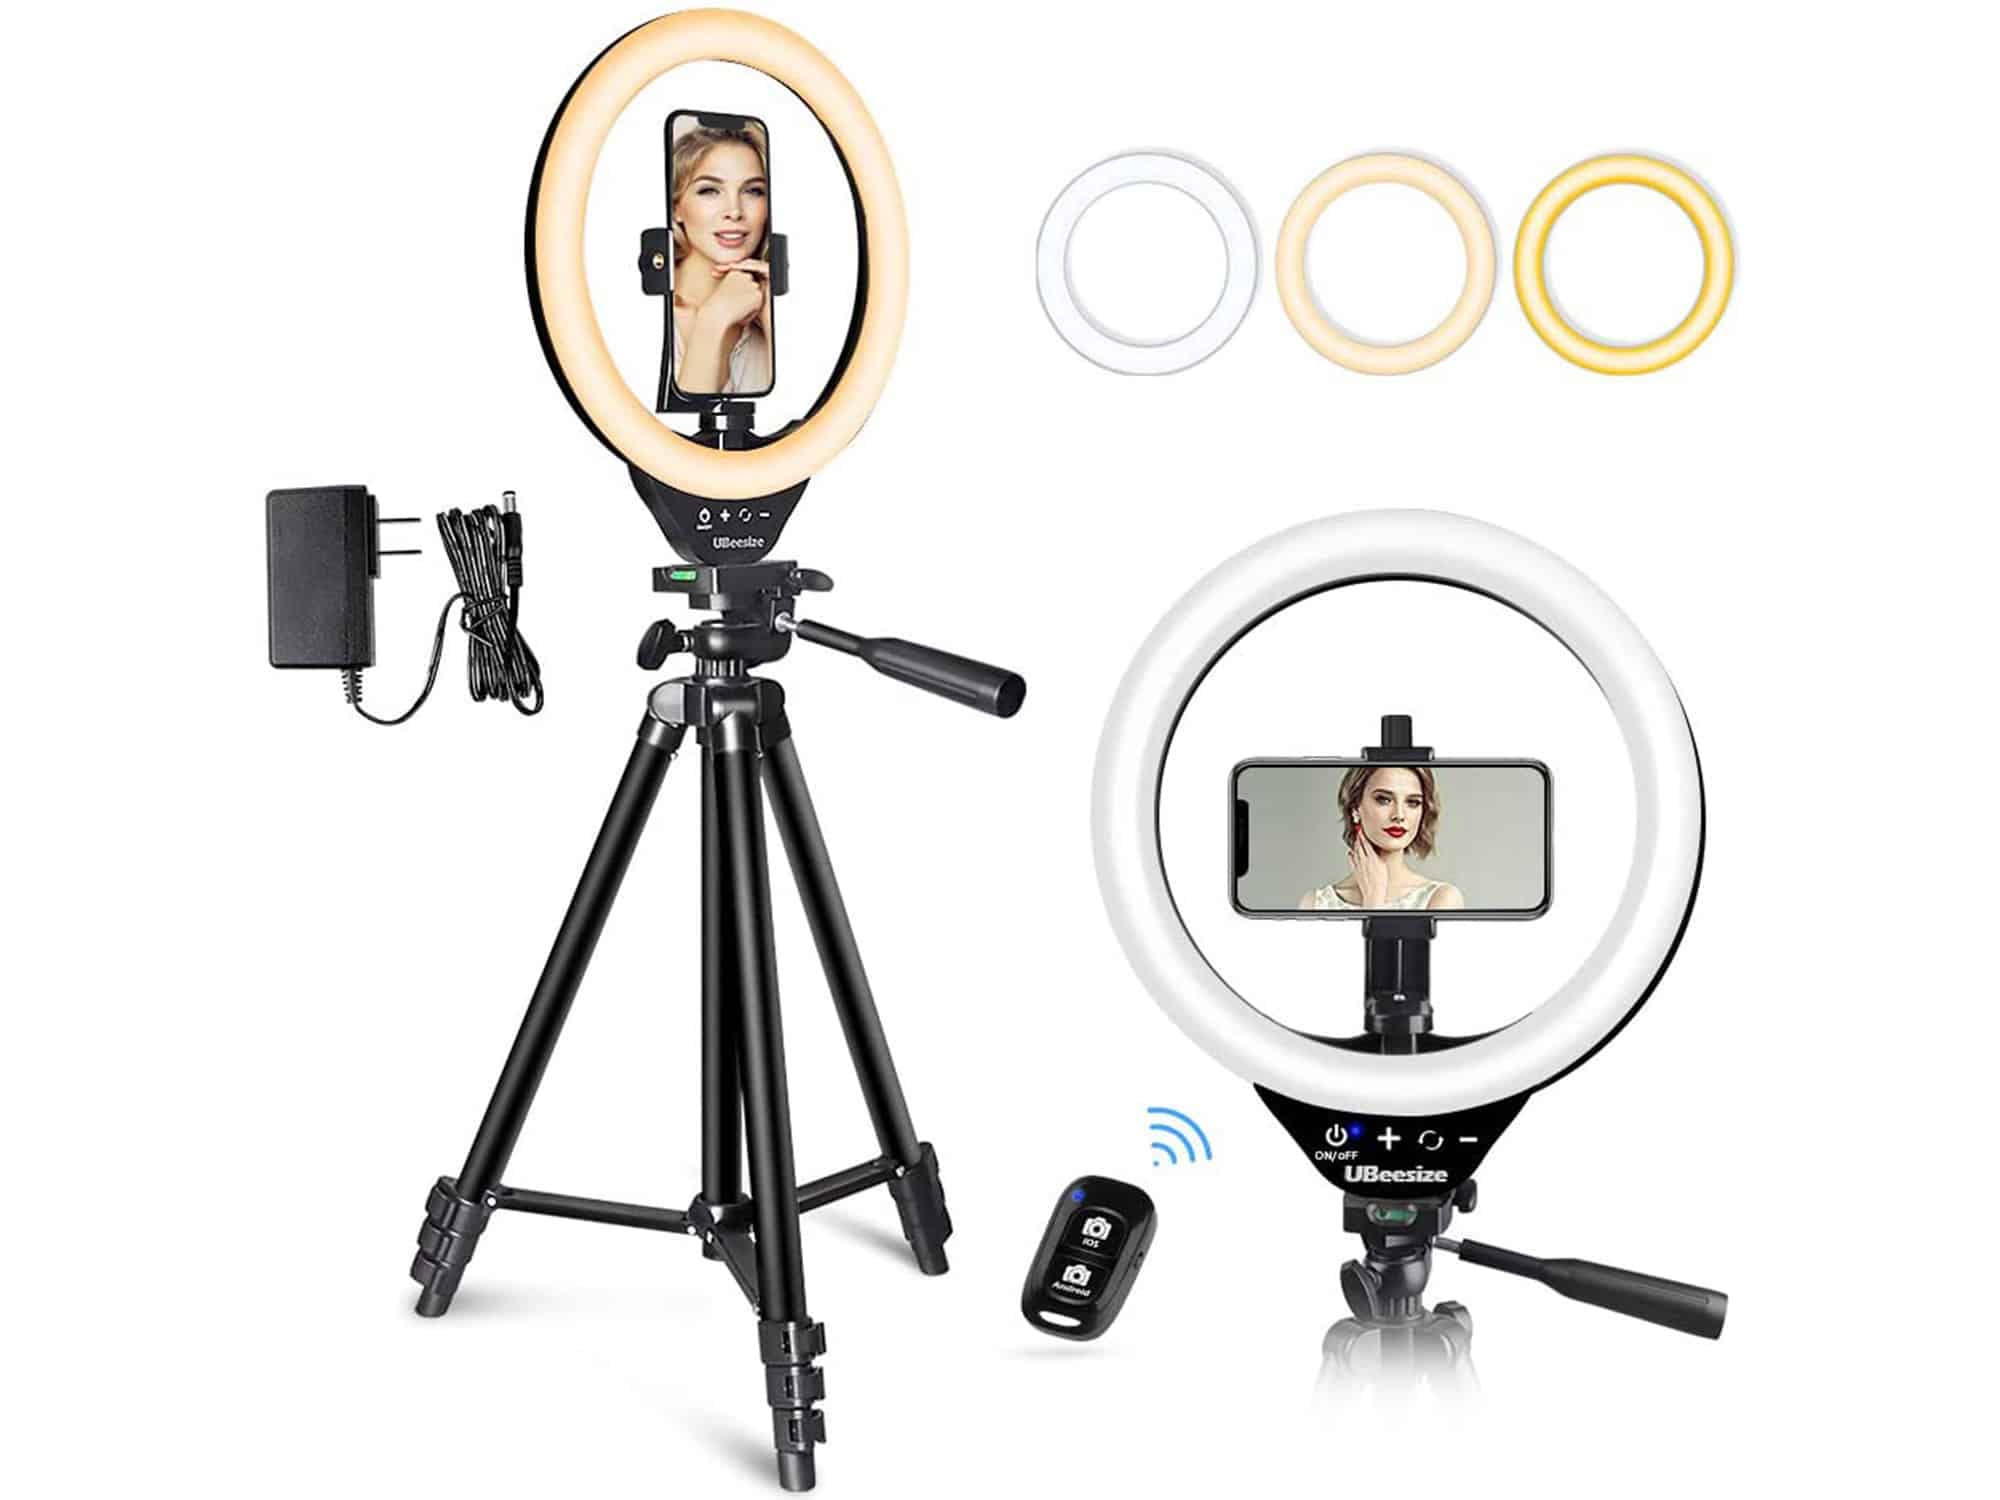 UBeesize 10'' LED Ring Light with Stand and Phone Holder, Selfie Halo Light for Photography/Makeup/Vlogging/Live Streaming, Compatible with Phones and Cameras (2020 Version)